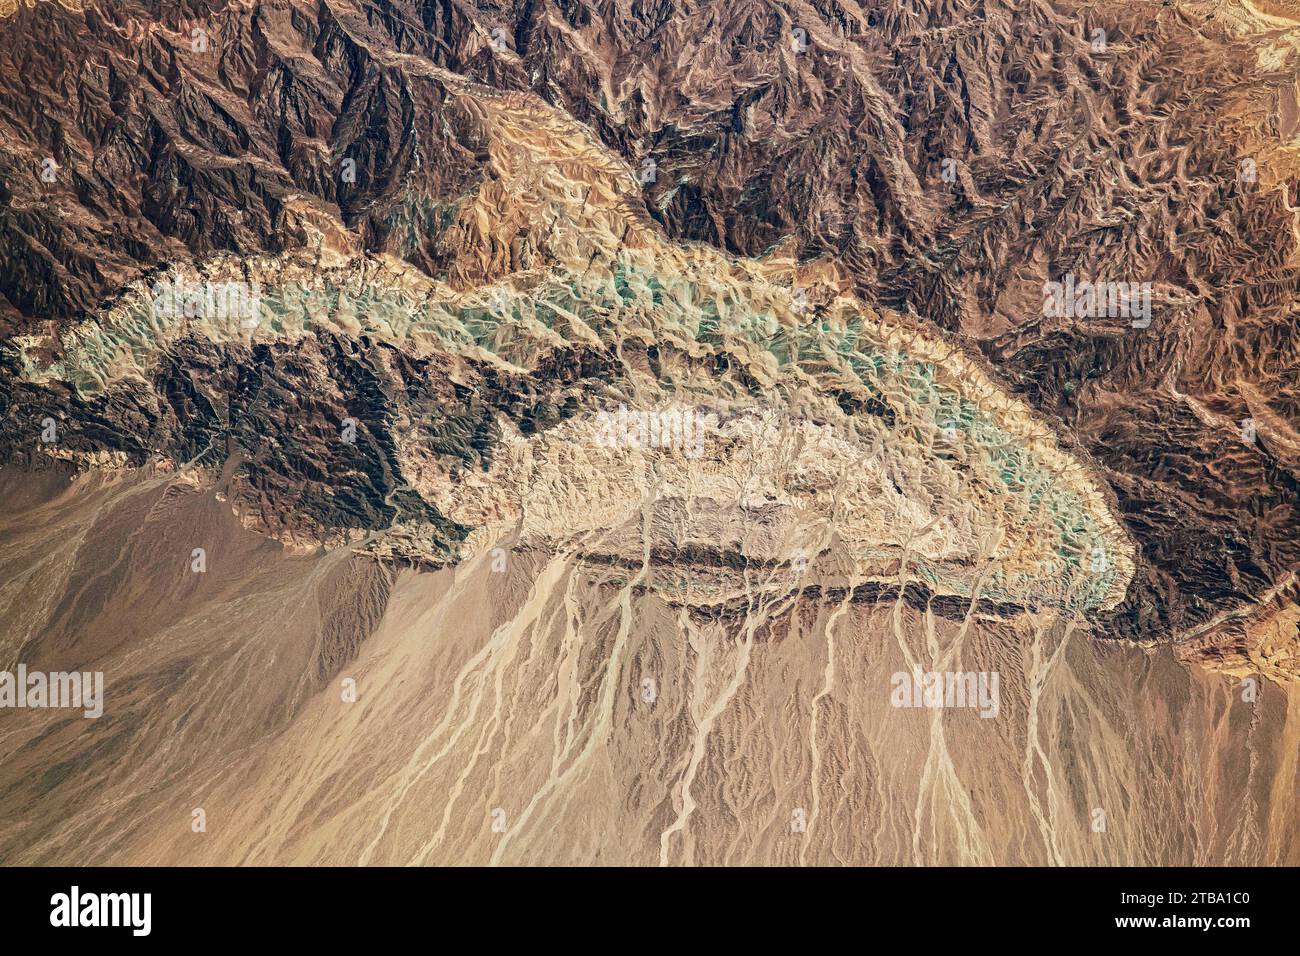 View from space showing a small semicircular mountain in the Dasht-e Kavir Desert, Iran. Stock Photo